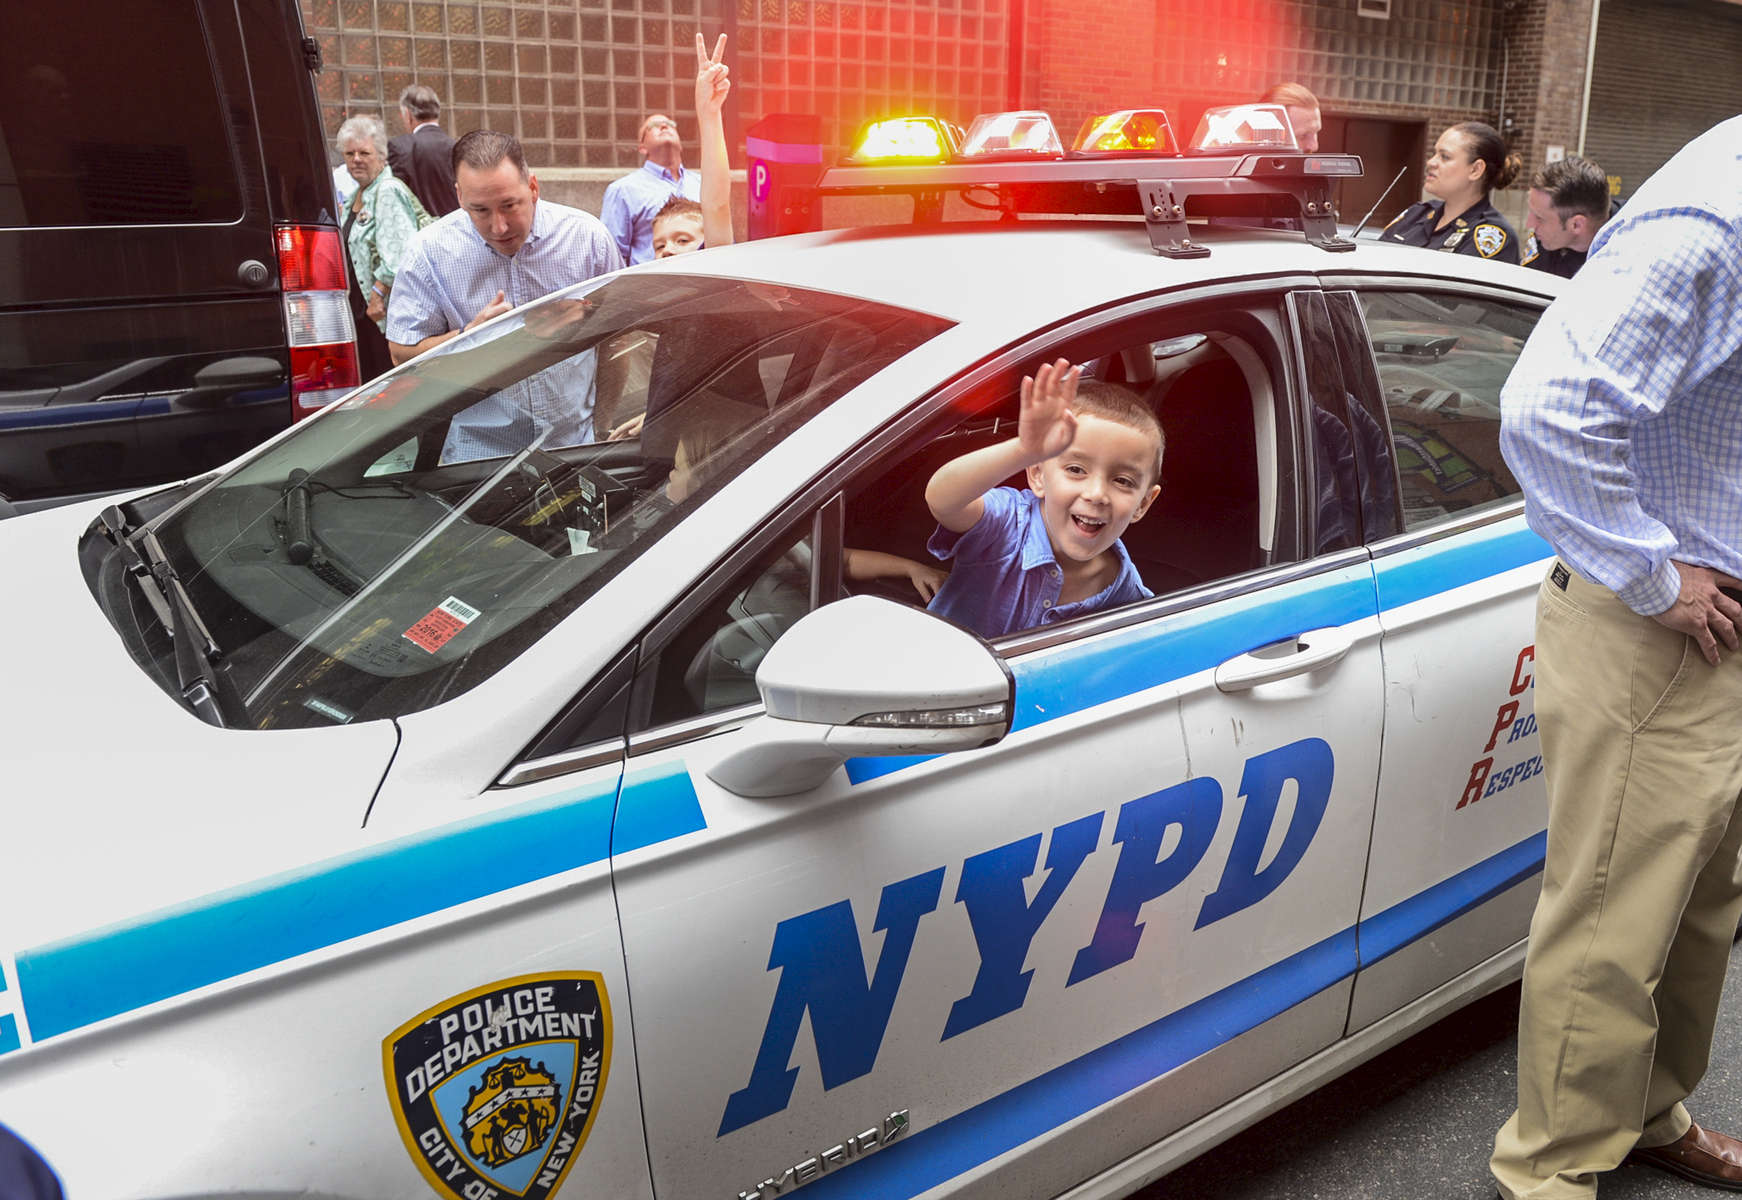 Robert (on the passenger side), Remi (on the middle inside) and Dean Dwyer (on the driver side) nephews and niece of NYPD Police Officer Anthony Dwyer, who in 1989 was pushed to his death off of a Times Square rooftop by convicted felon Eddie Matos, play inside an NYPD squad car after attending Eddie Matos' parole hearing on Friday May 13, 2016. 